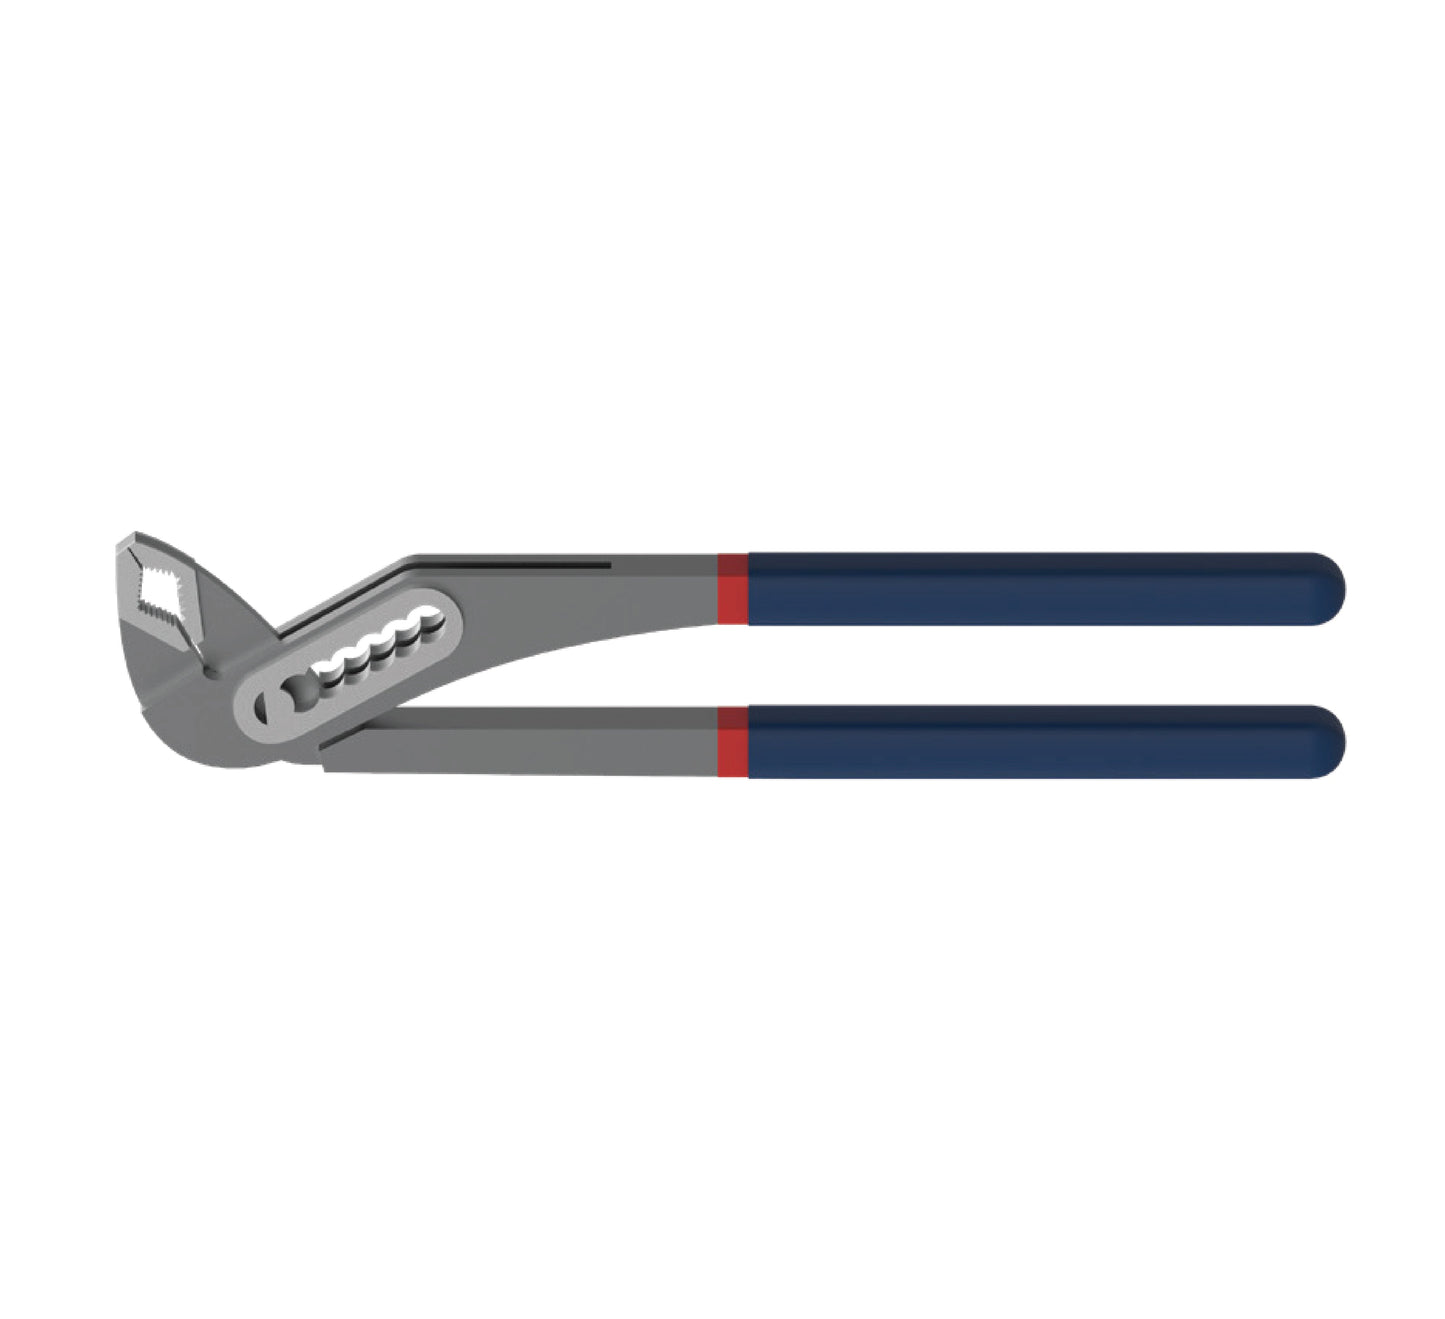 APT GROOVE JOINT PLIER D4 10" BLACK THEN POLISH/ RED BLUE HANDLE-NEW APT PP CARD WITH RED STRAP AH1233241-10